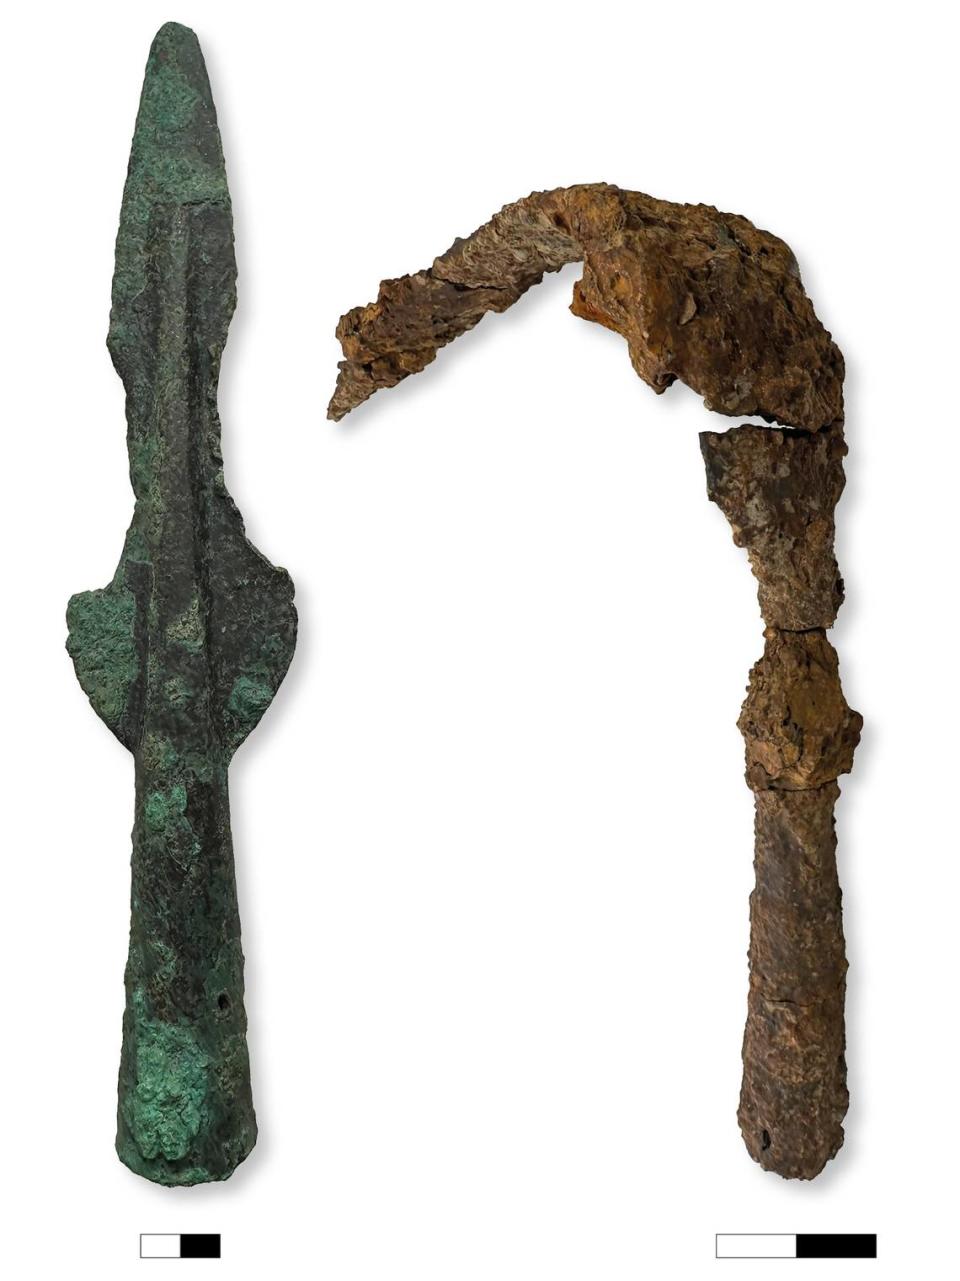 Researchers identified ancient weapons from the offerings inside the building.